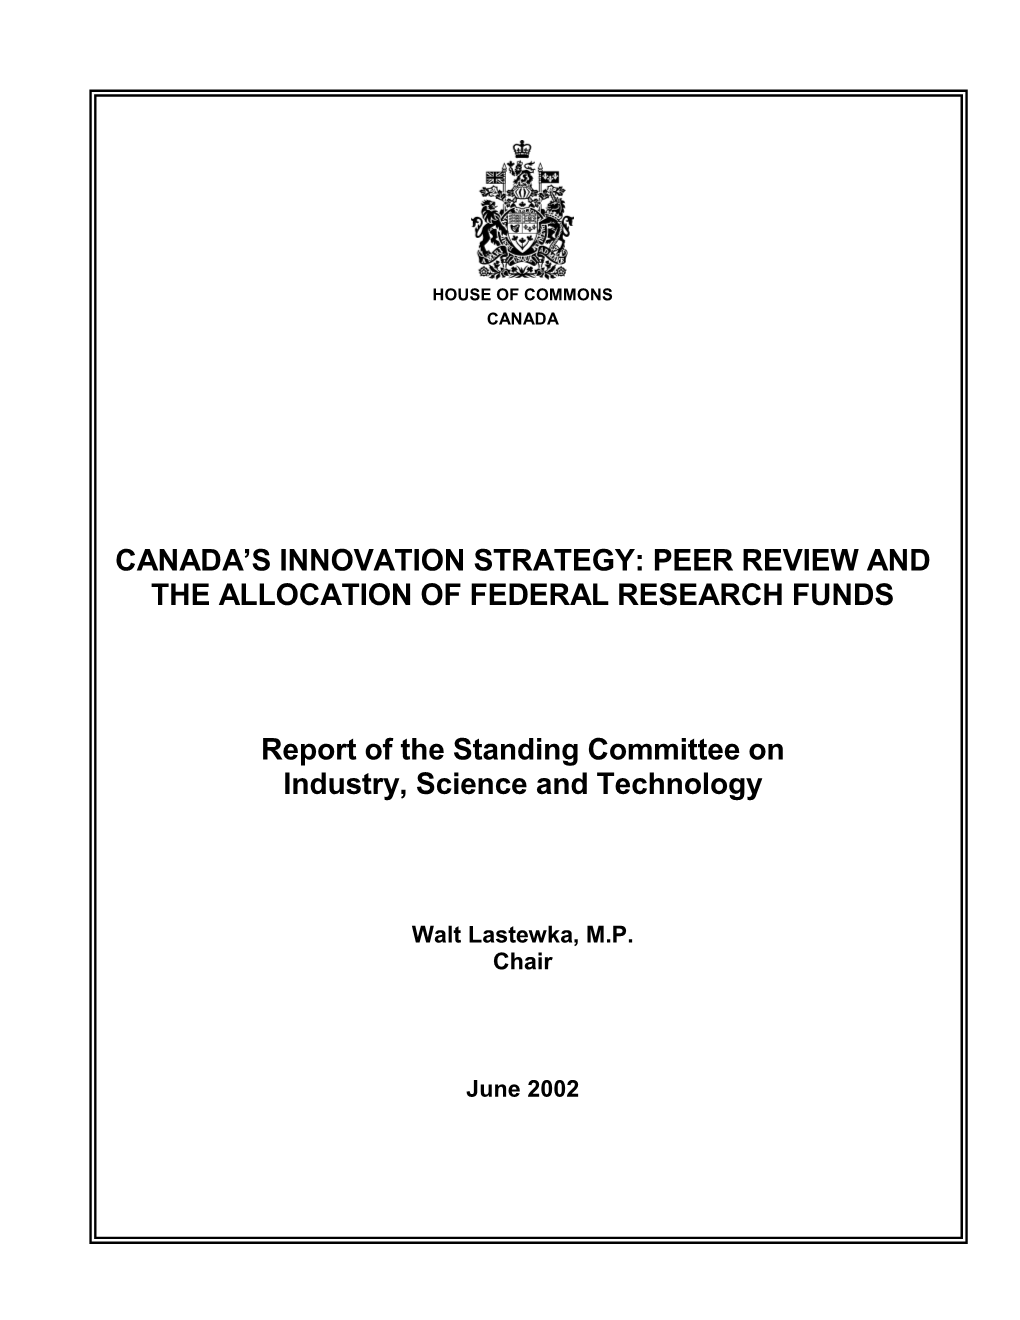 Canada's Innovation Strategy: Peer Review And